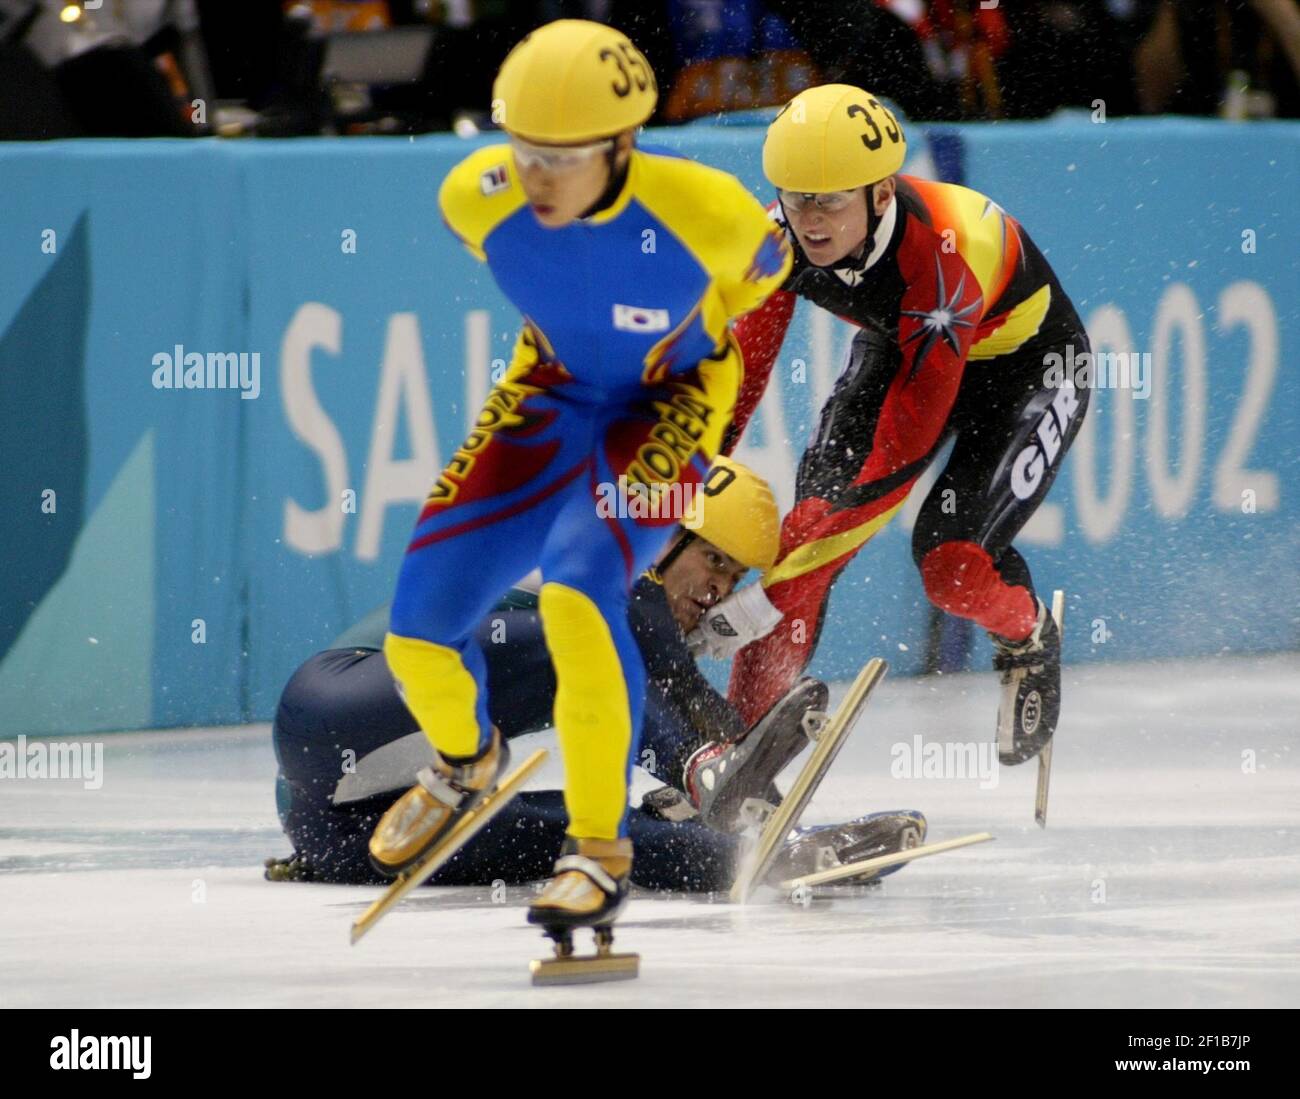 NO MAGS, NO SALES -- KRT SPORTS STORY SLUGGED: OLY-SHORTTRACK KRT  PHOTOGRAPH BY ERICH SCHLEGEL/DALLAS MORNING NEWS (February 20) SALT LAKE  CITY, UT-- (THIRD IN A SERIES OF 4) Germany's Andre